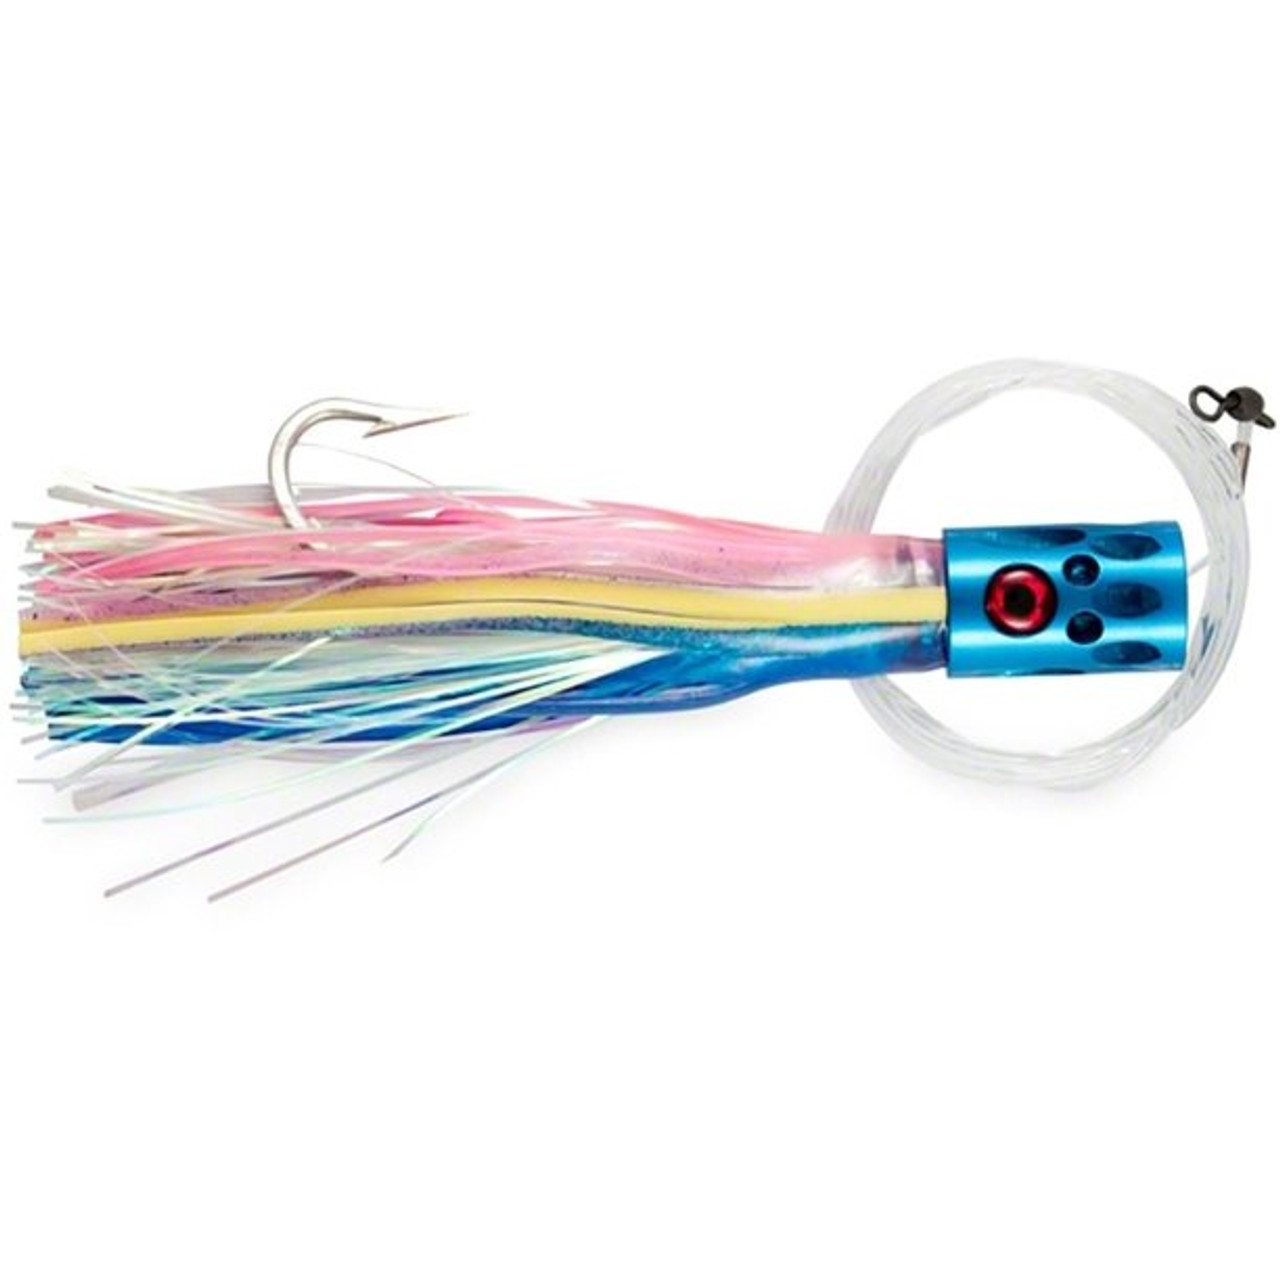 Billy Baits - Magnum Turbo Whistler Lure - Rigged & Ready Mono - FISH307.com